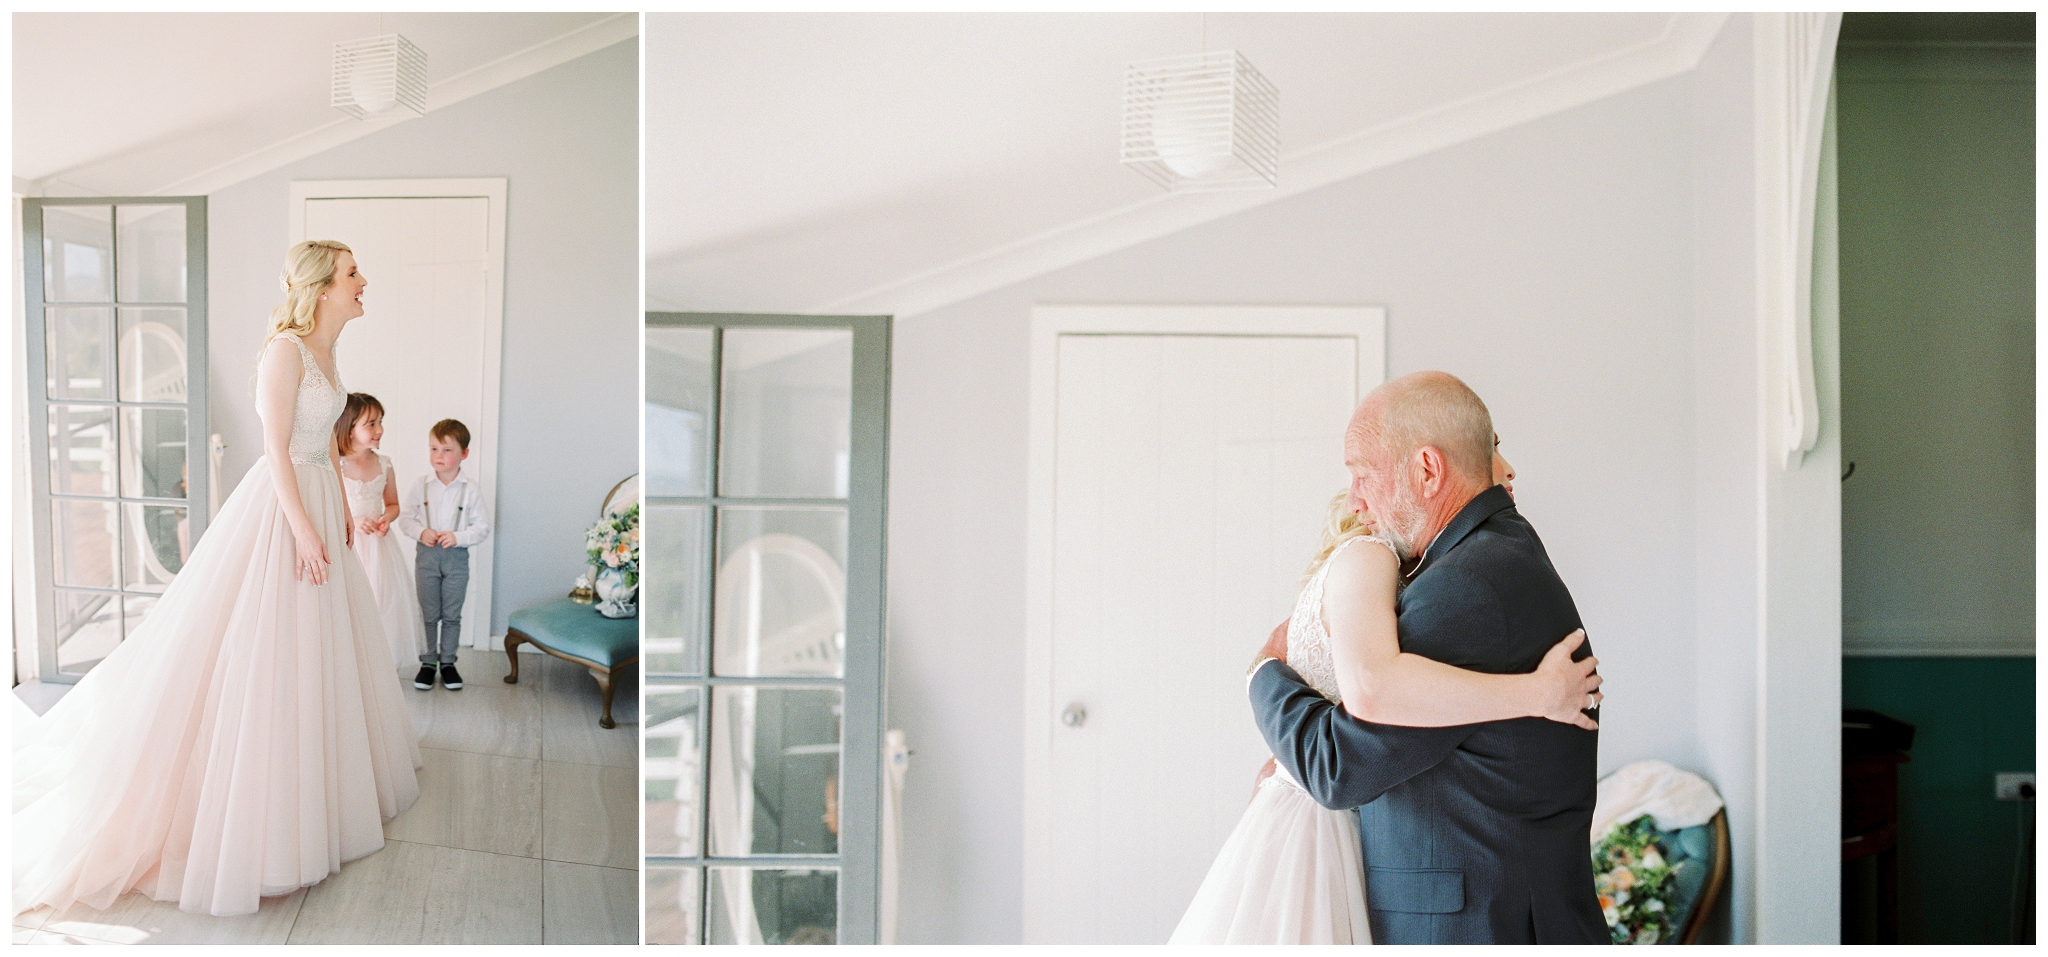 Tegan and Alex Wedding at Albert River Wines by Casey Jane Photography 23